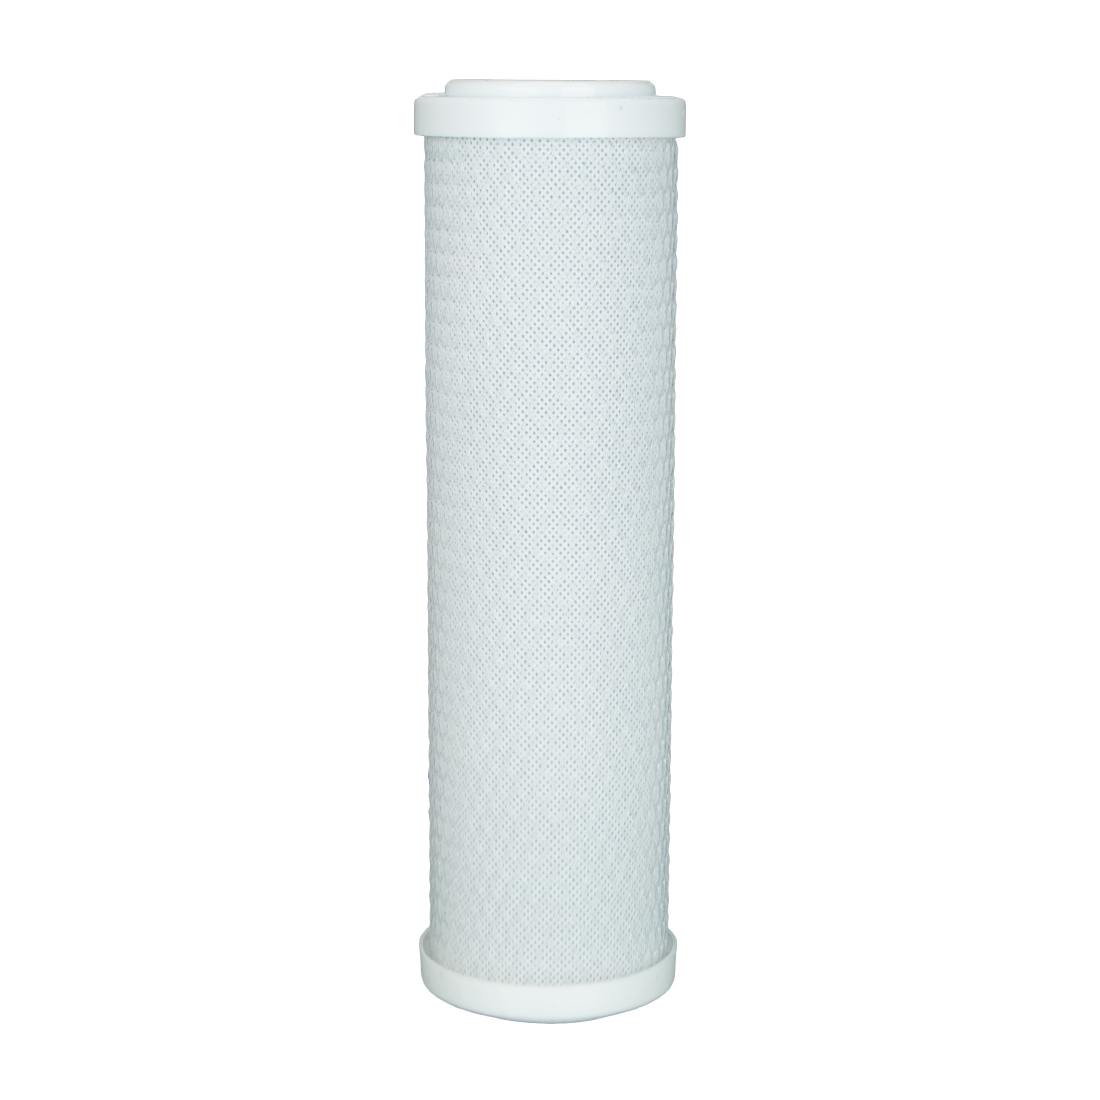 XERO Pure Carbon Filter - 10 Inch - Front View